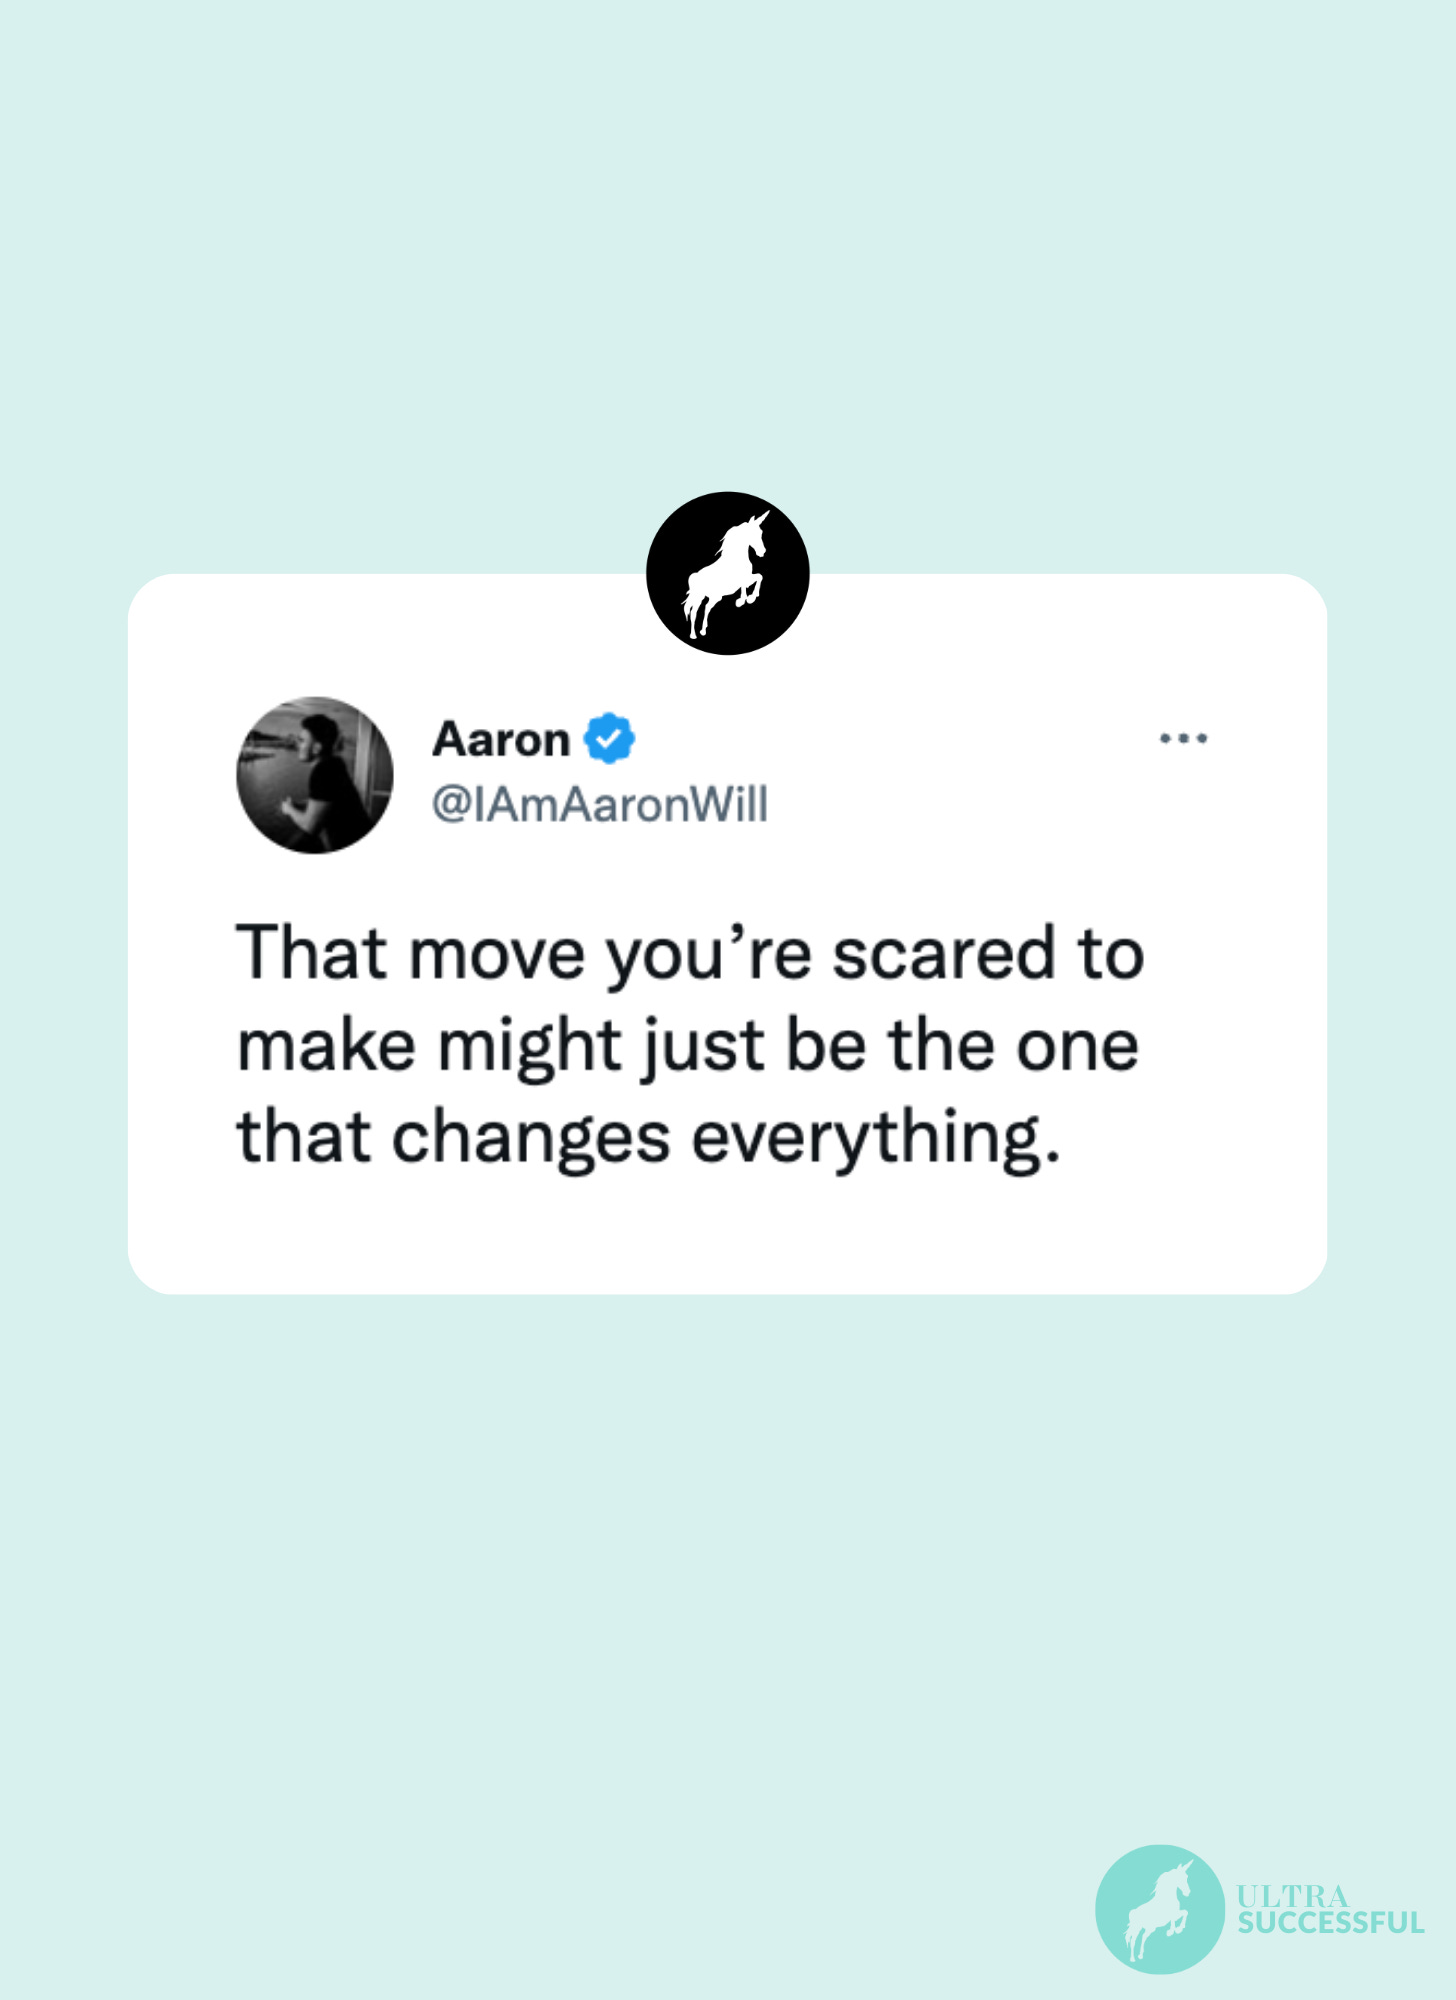 @IAmAaronWill: That move you’re scared to make might just be the one that changes everything.